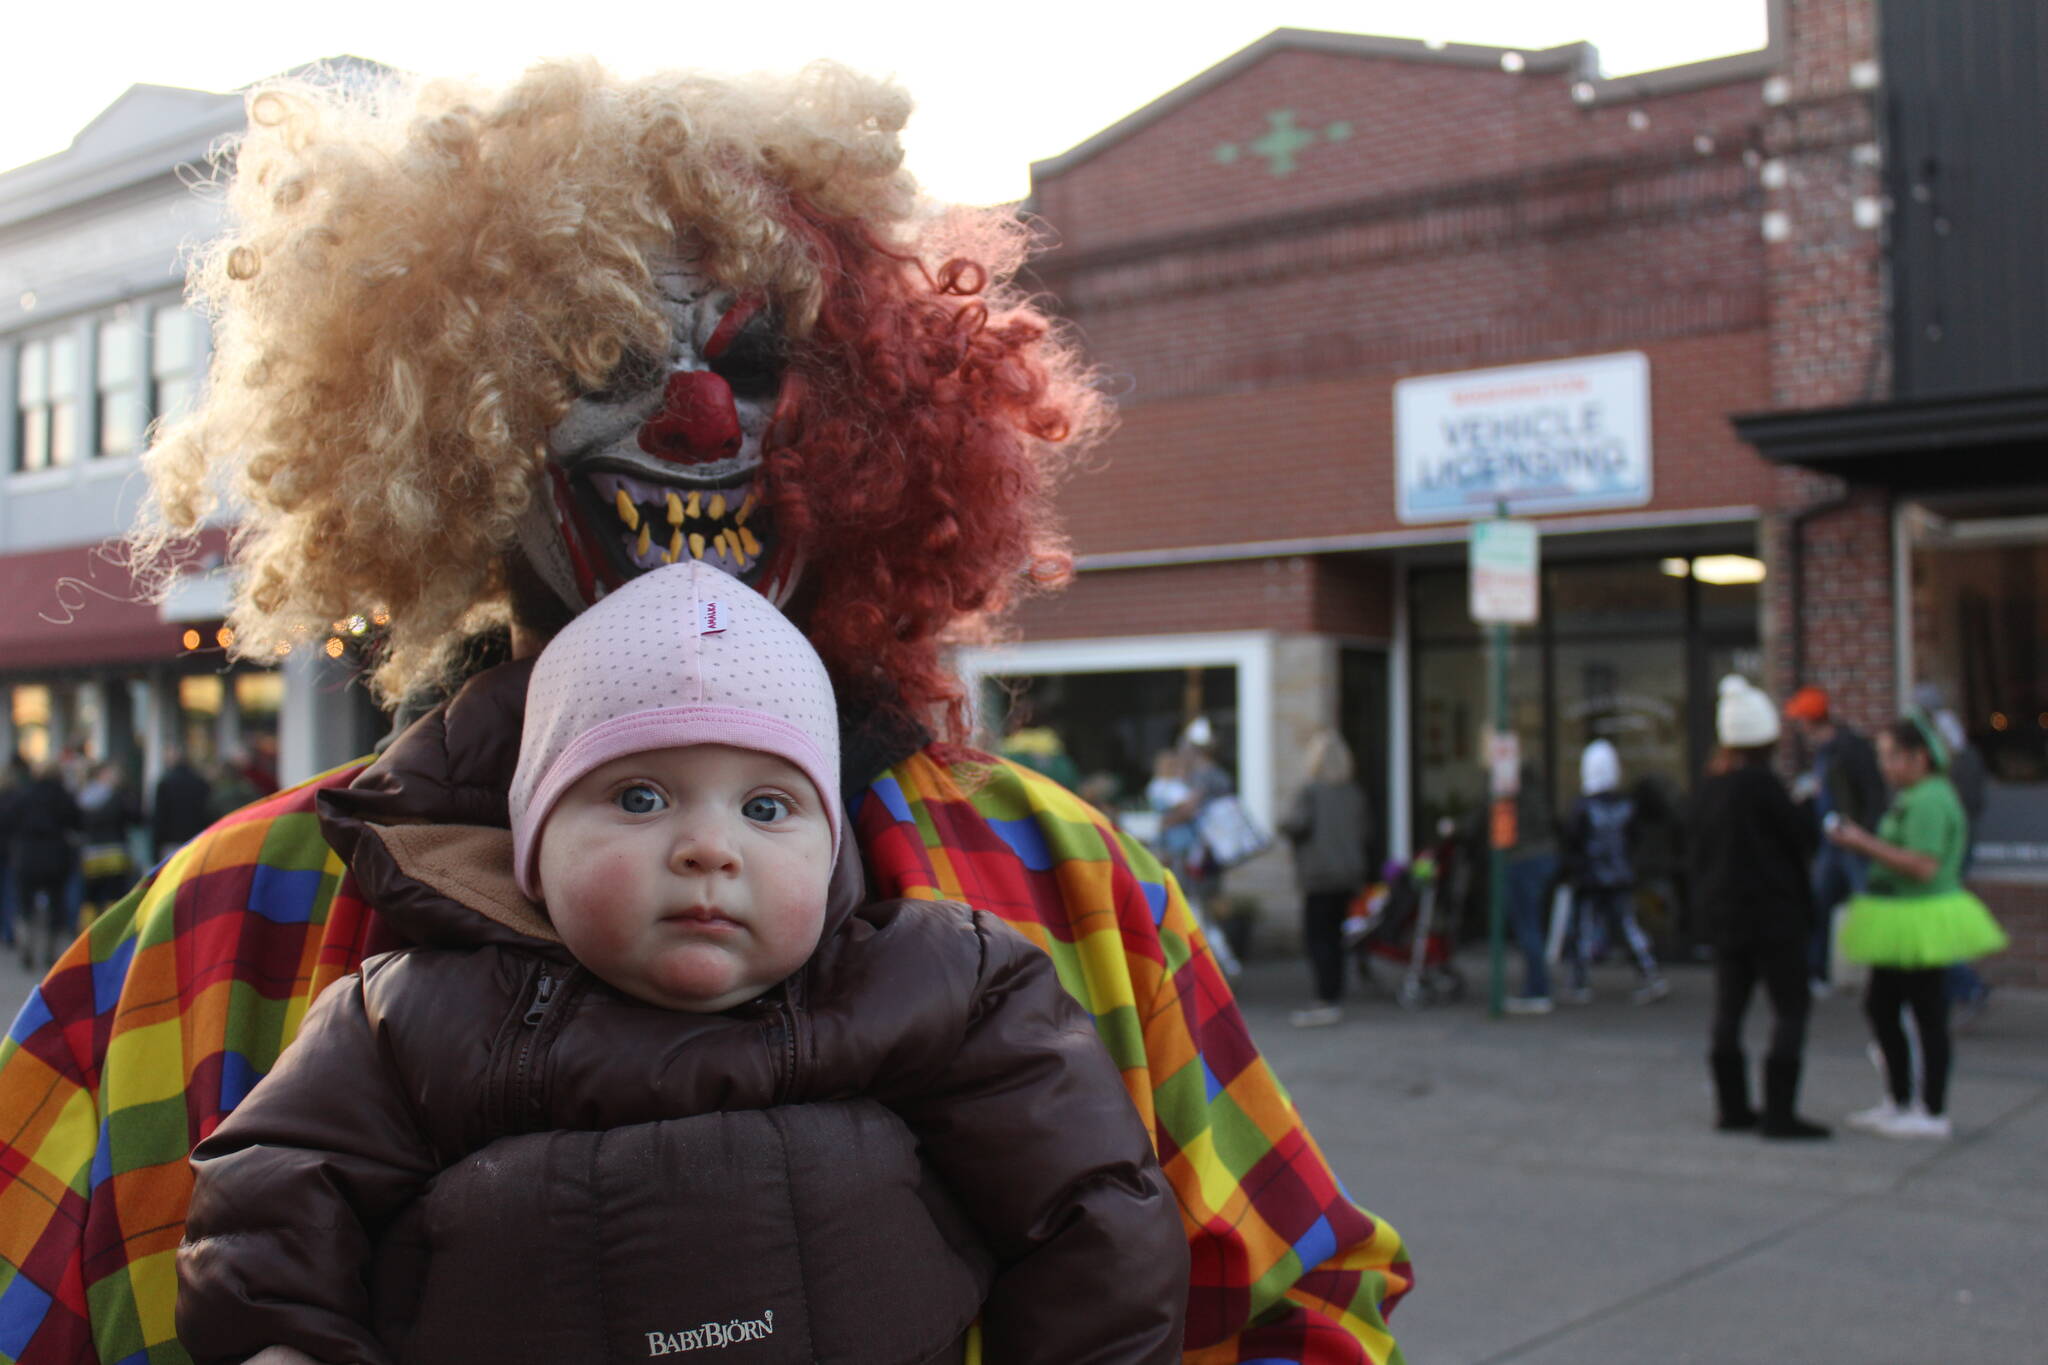 Photos by Ray Miller-Still 
Halloween season is upon us, and Enumclaw plans to close down Cole Street again this year to give families the opportunity to safely trick-or-treat downtown.